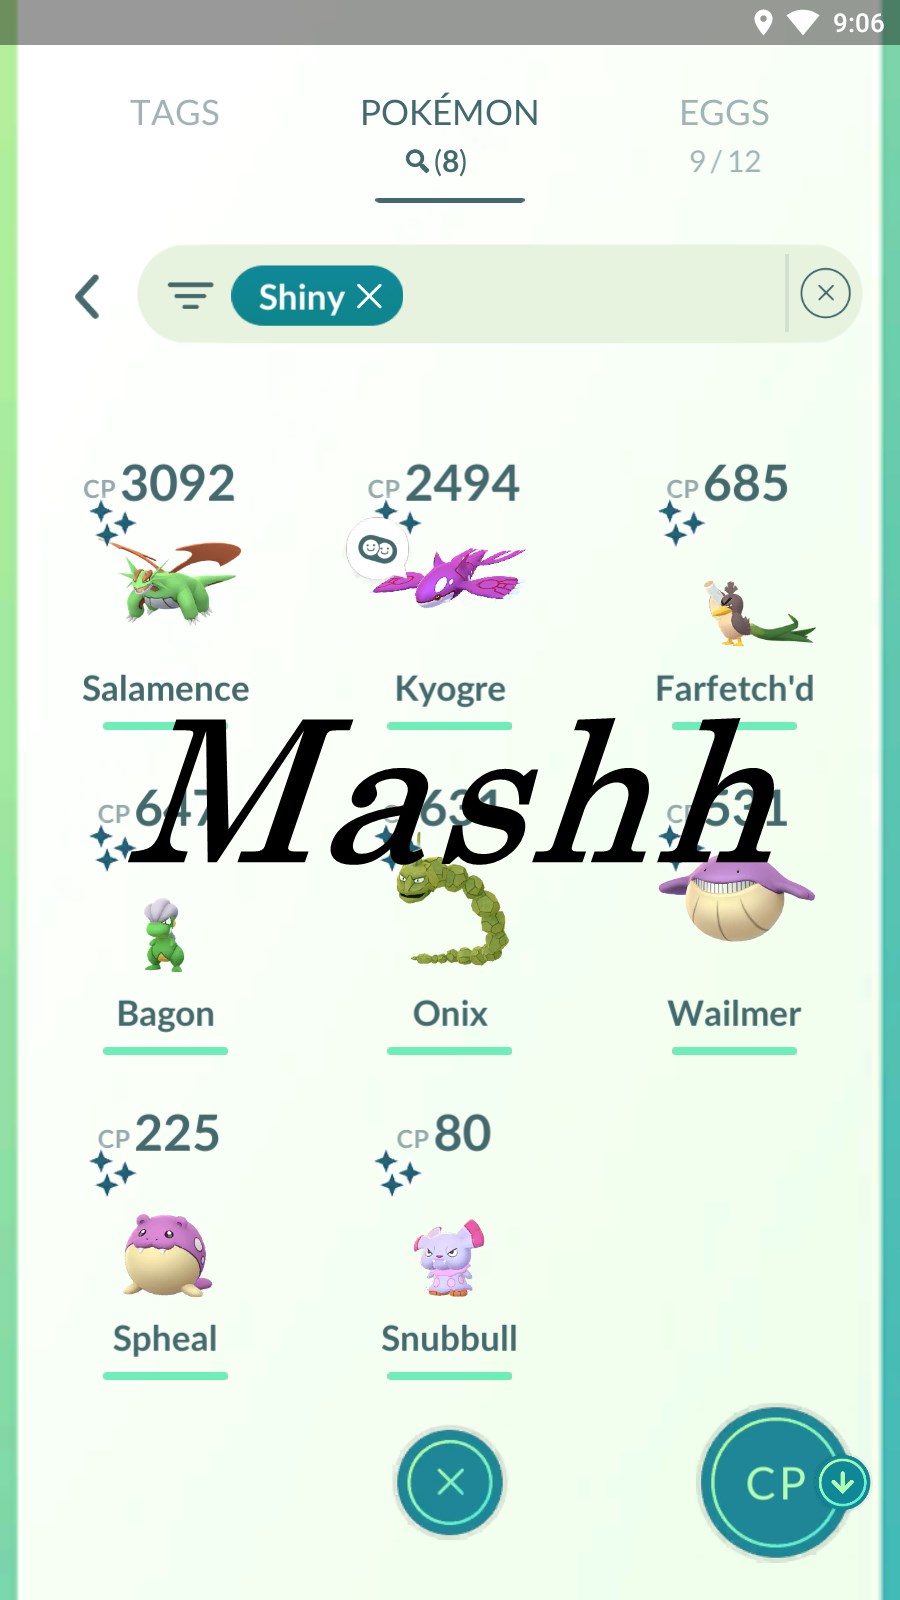 Account Starter with Shiny Primal Kyogre, Hundo Purified Mewtwo and MasterBall